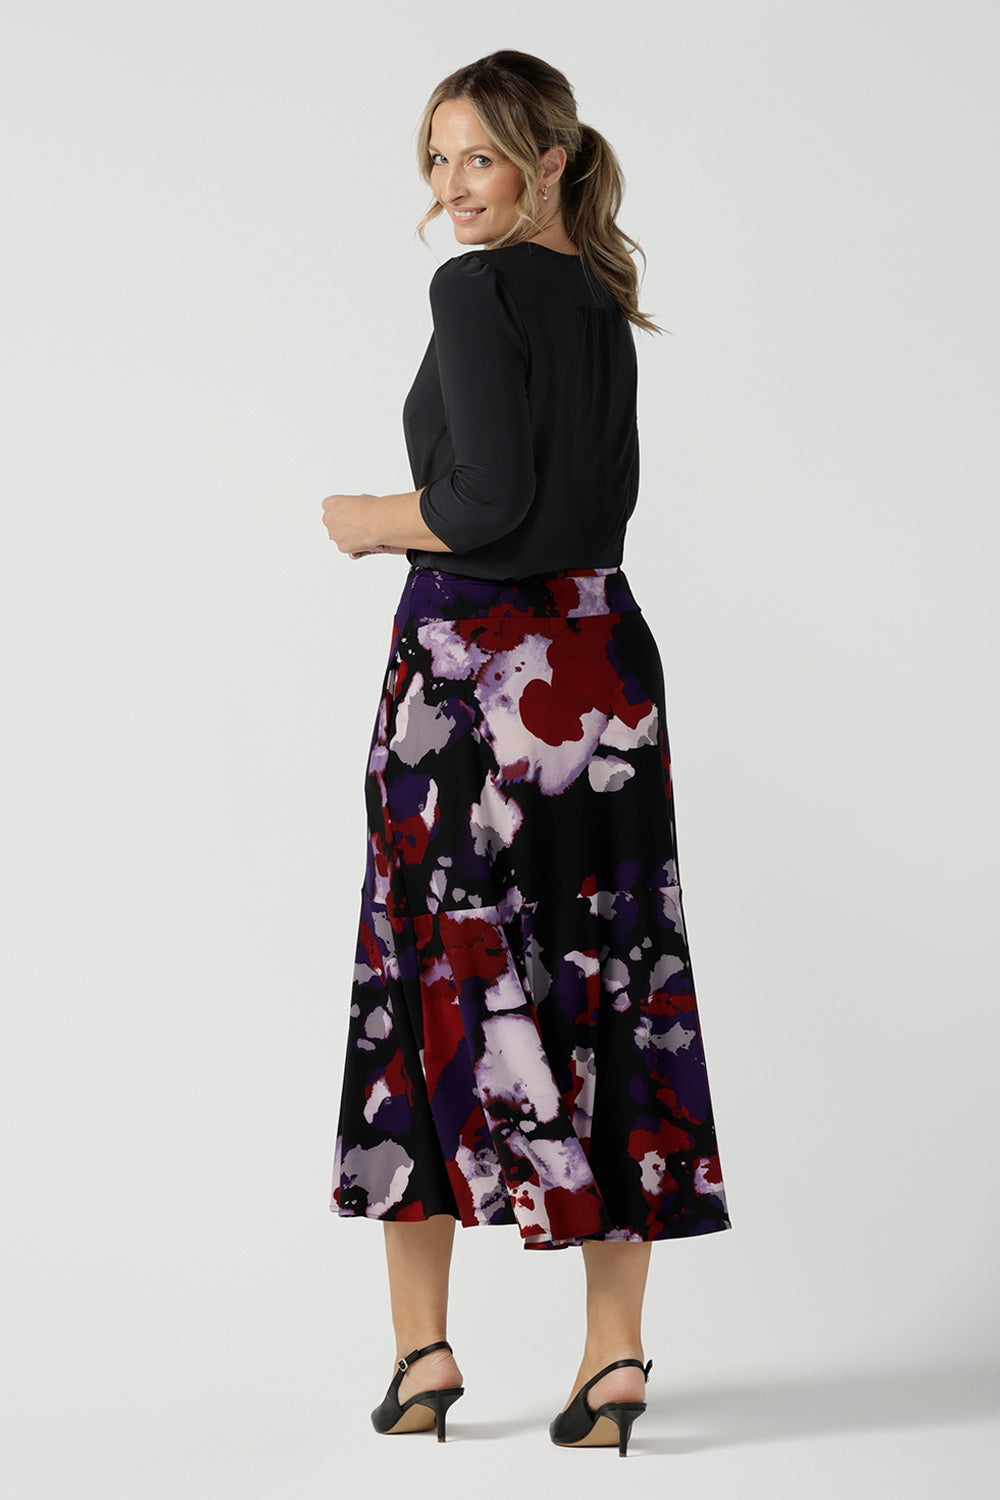 Back view of a size 10 woman wears the Berit Maxi skirt in the Fitzroy Print. Styled back with black pumps. Made in Australia for women size 8 - 24.